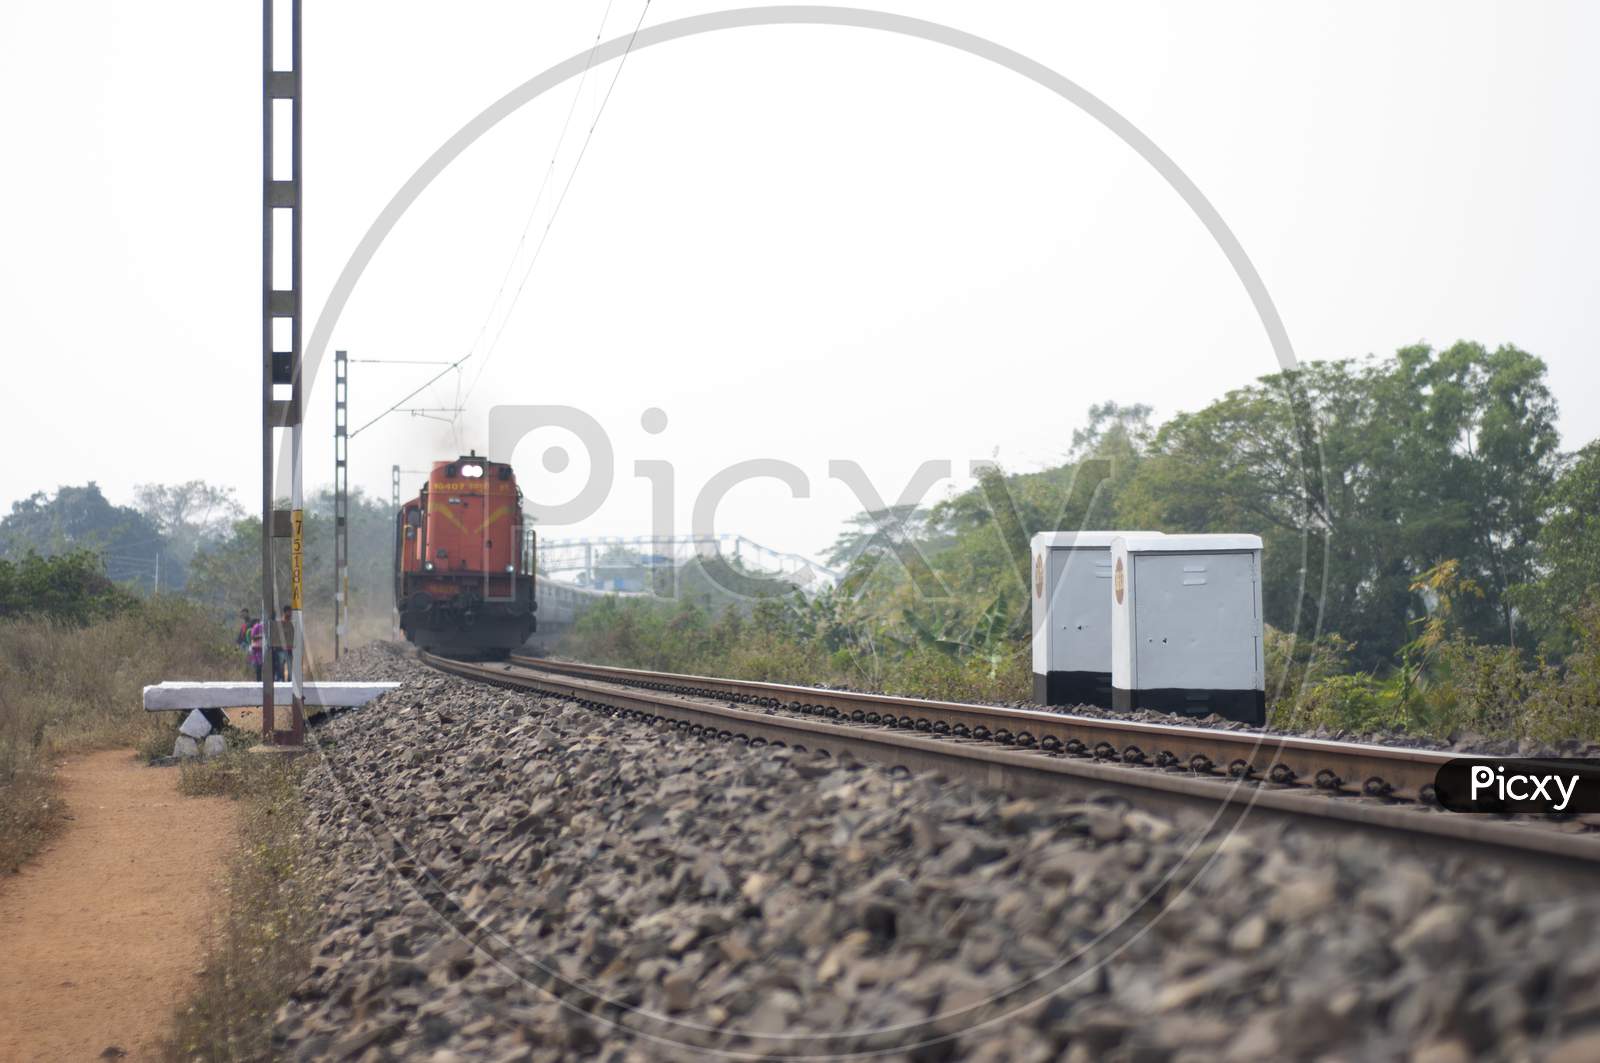 Khirai Midnapore, West Bengal, India - 11Th October 2020 : A Passenger Train Of Indian Railway Accelerating.